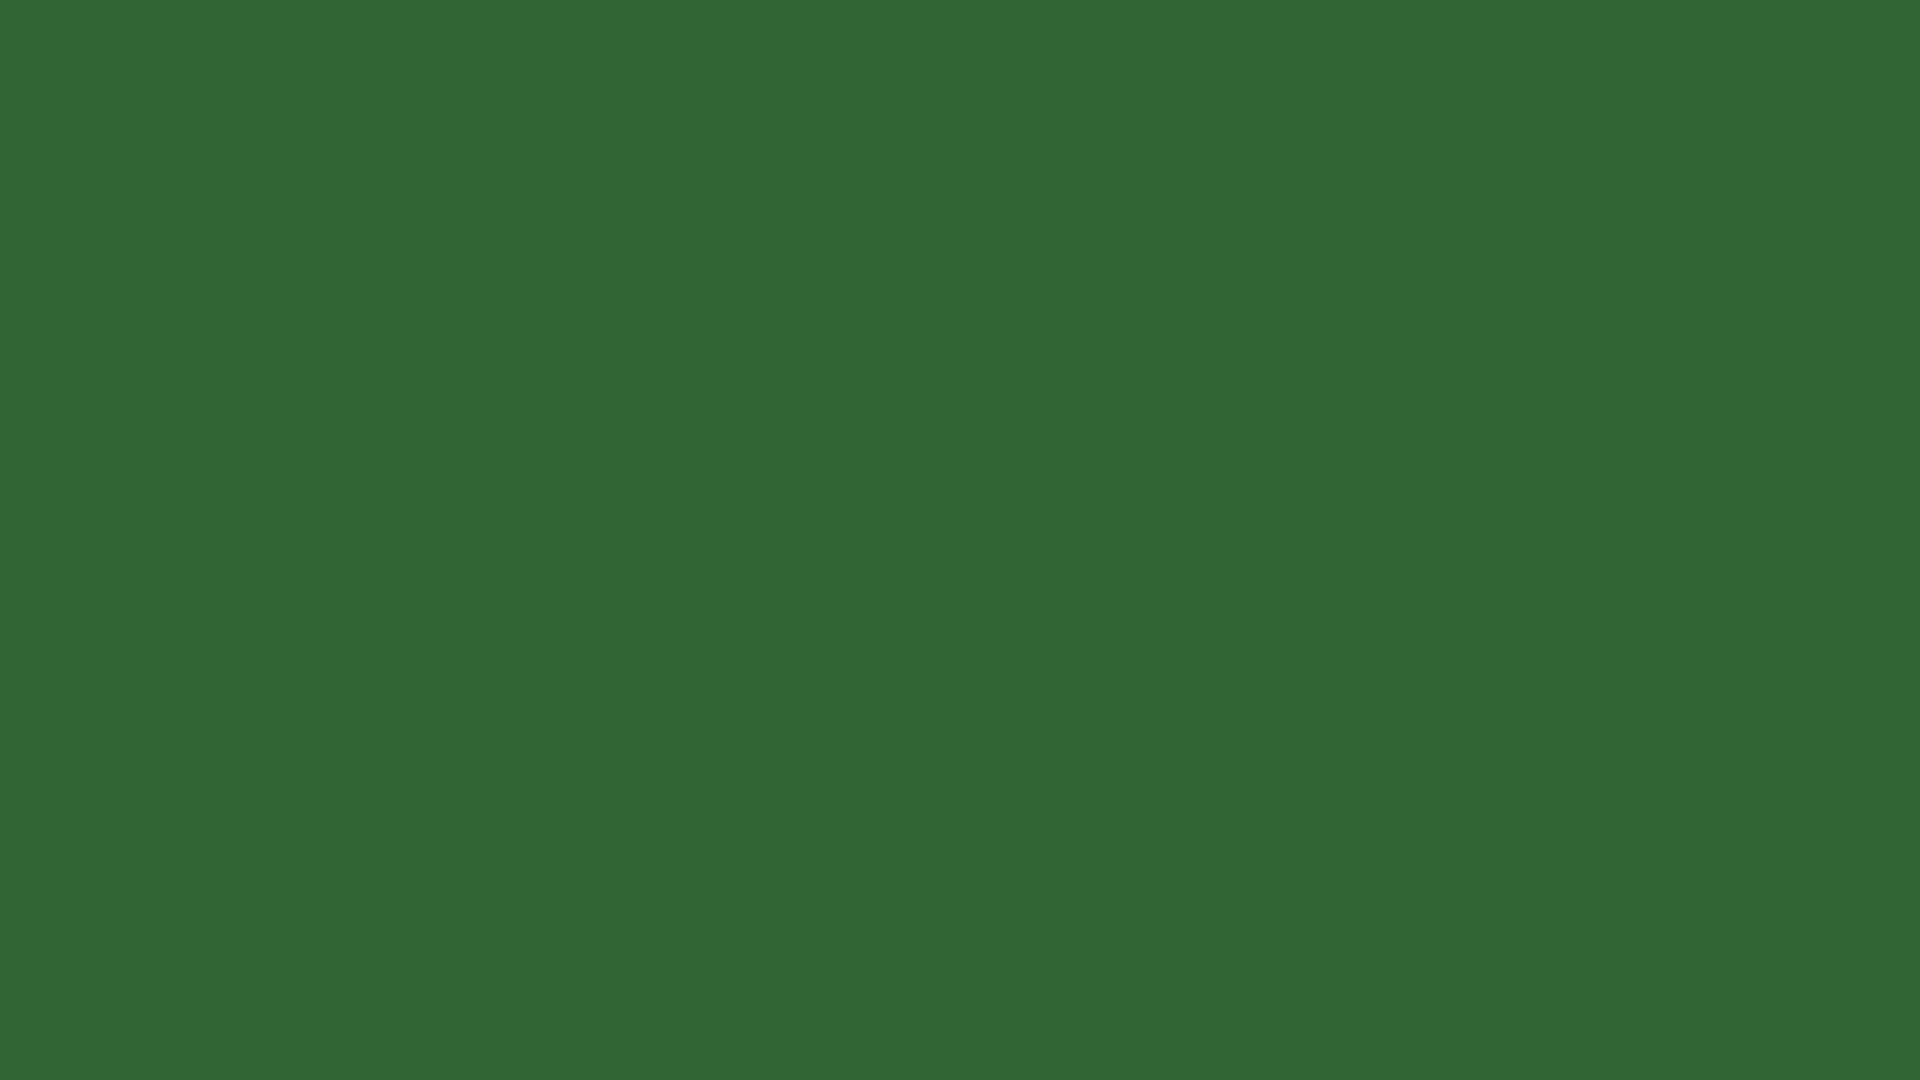 dark green background for animal health collection